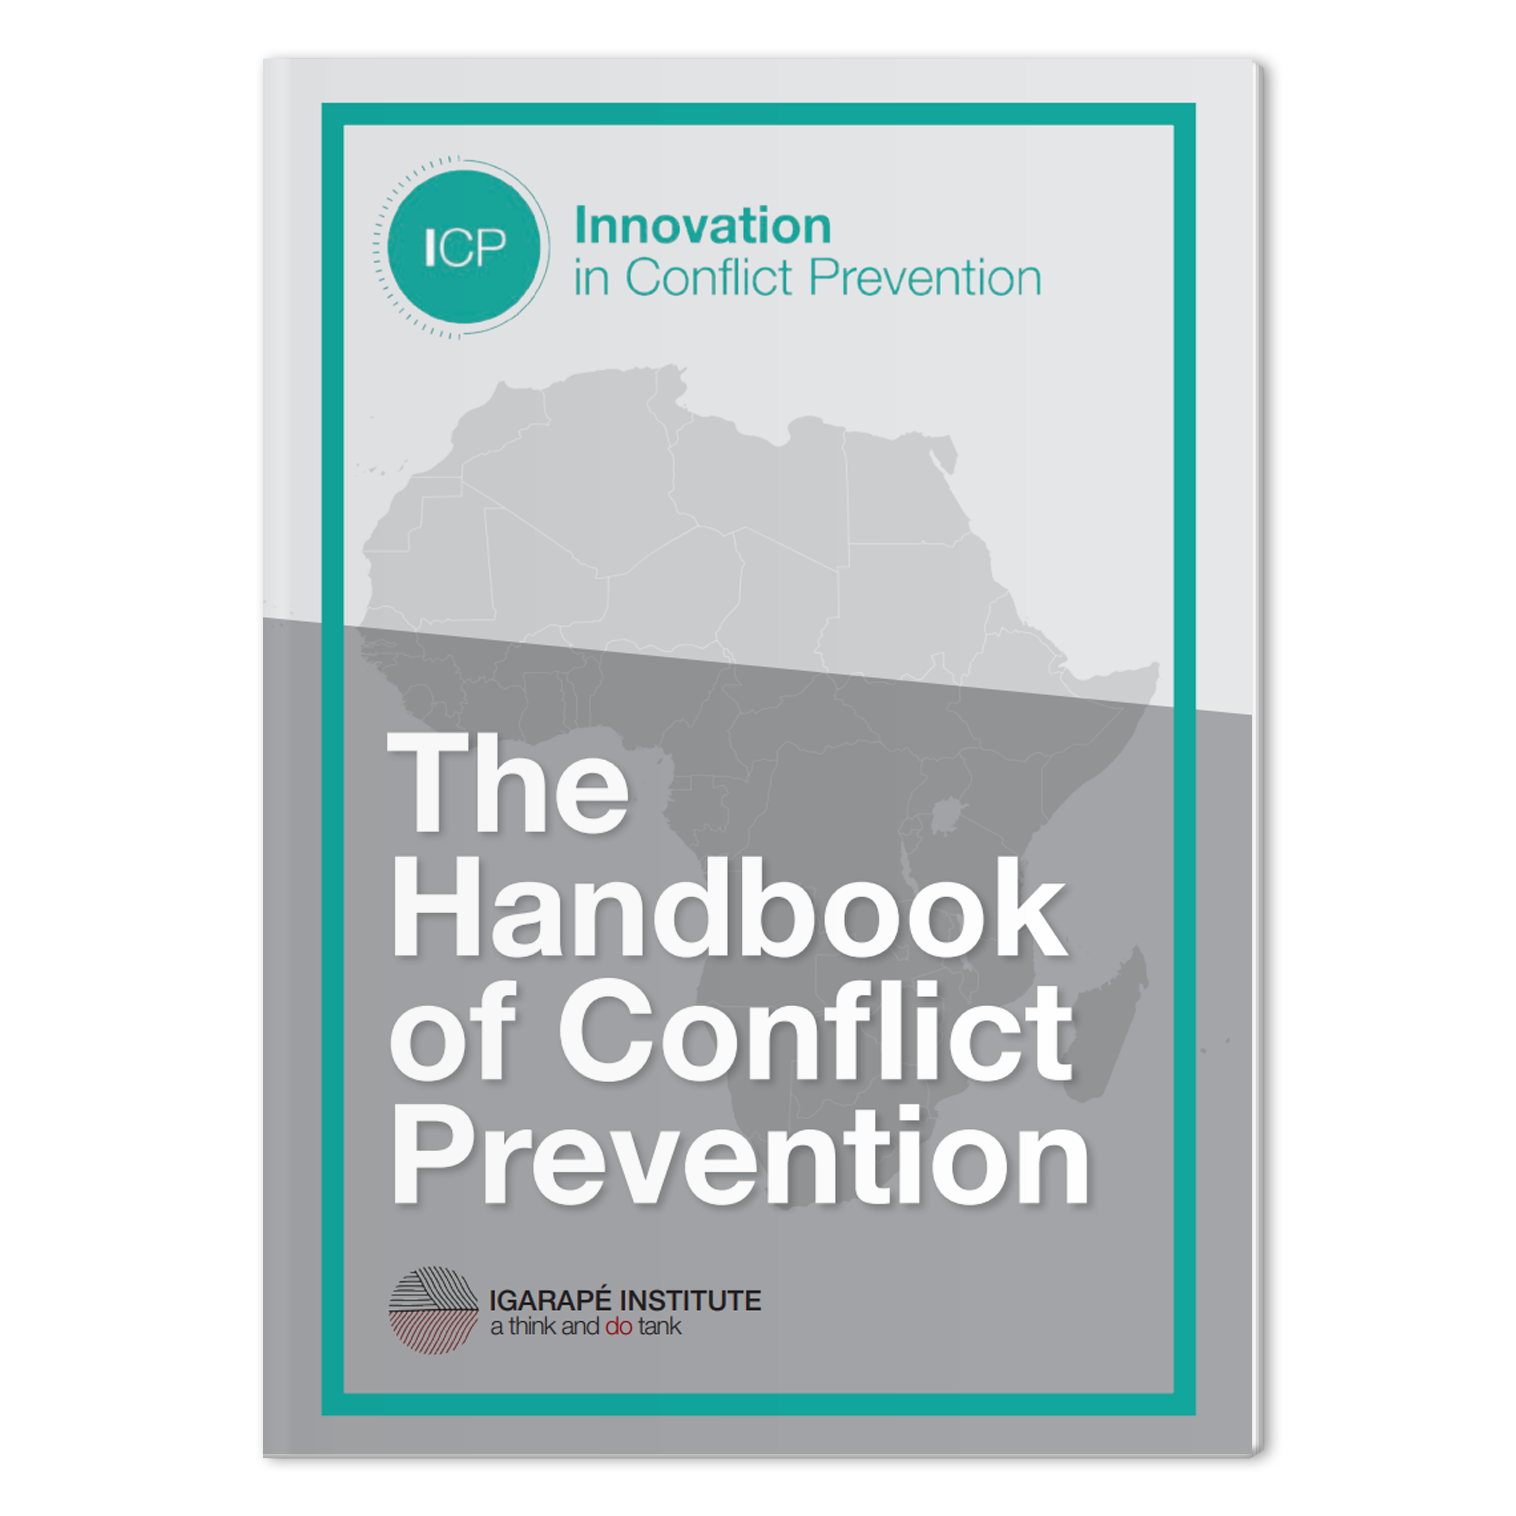 The Handbook of Conflict Prevention